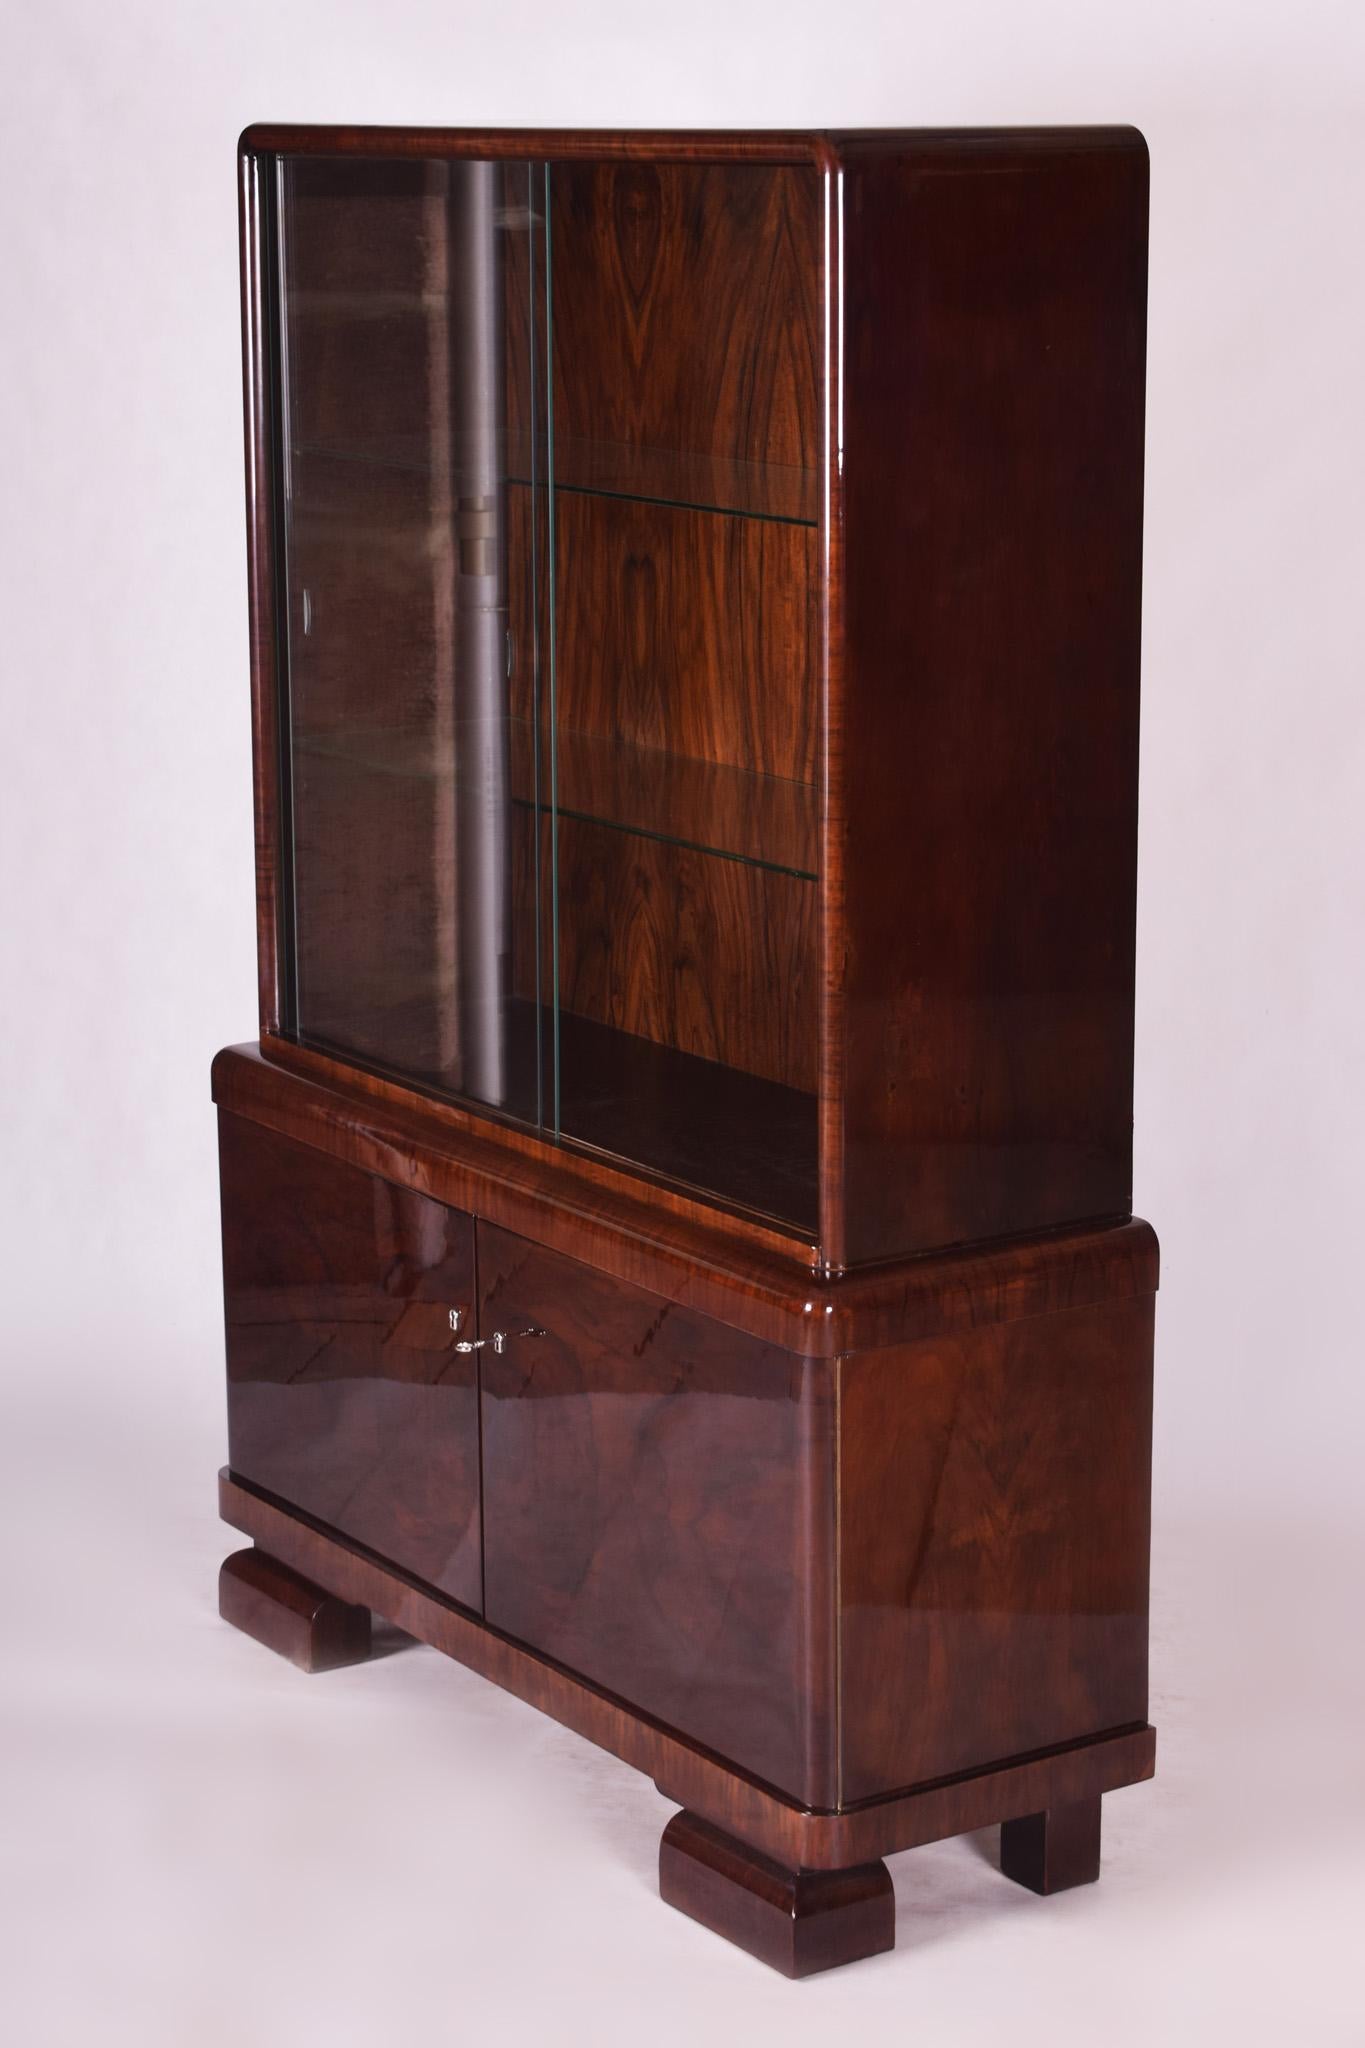 Completely Restored Walnut Art Deco Showcase from Czechia, 1930s For Sale 8